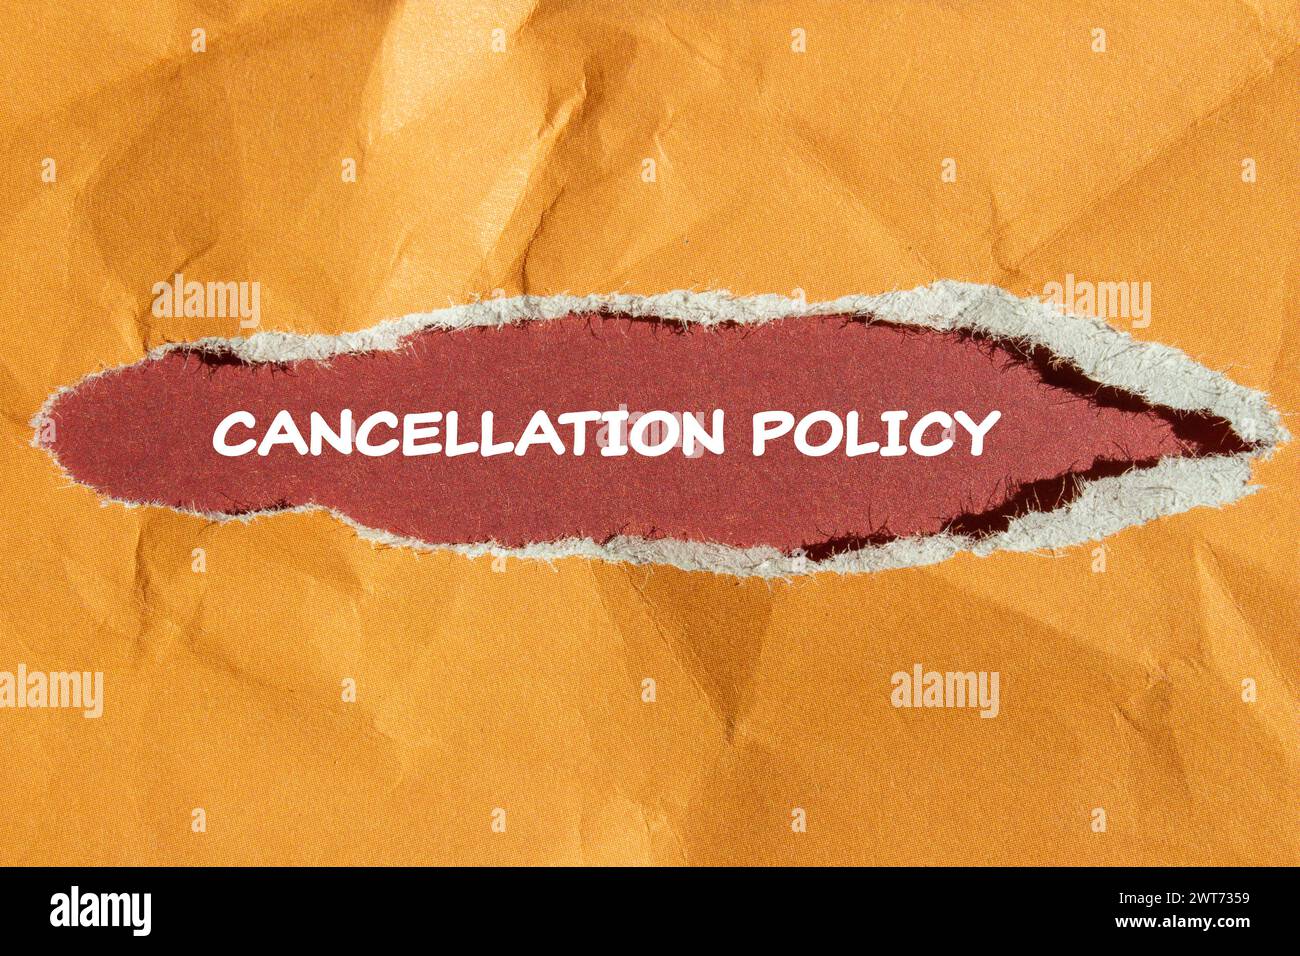 Cancellation policy words written on orange torn paper with red background. Conceptual symbol. Copy space. Stock Photo